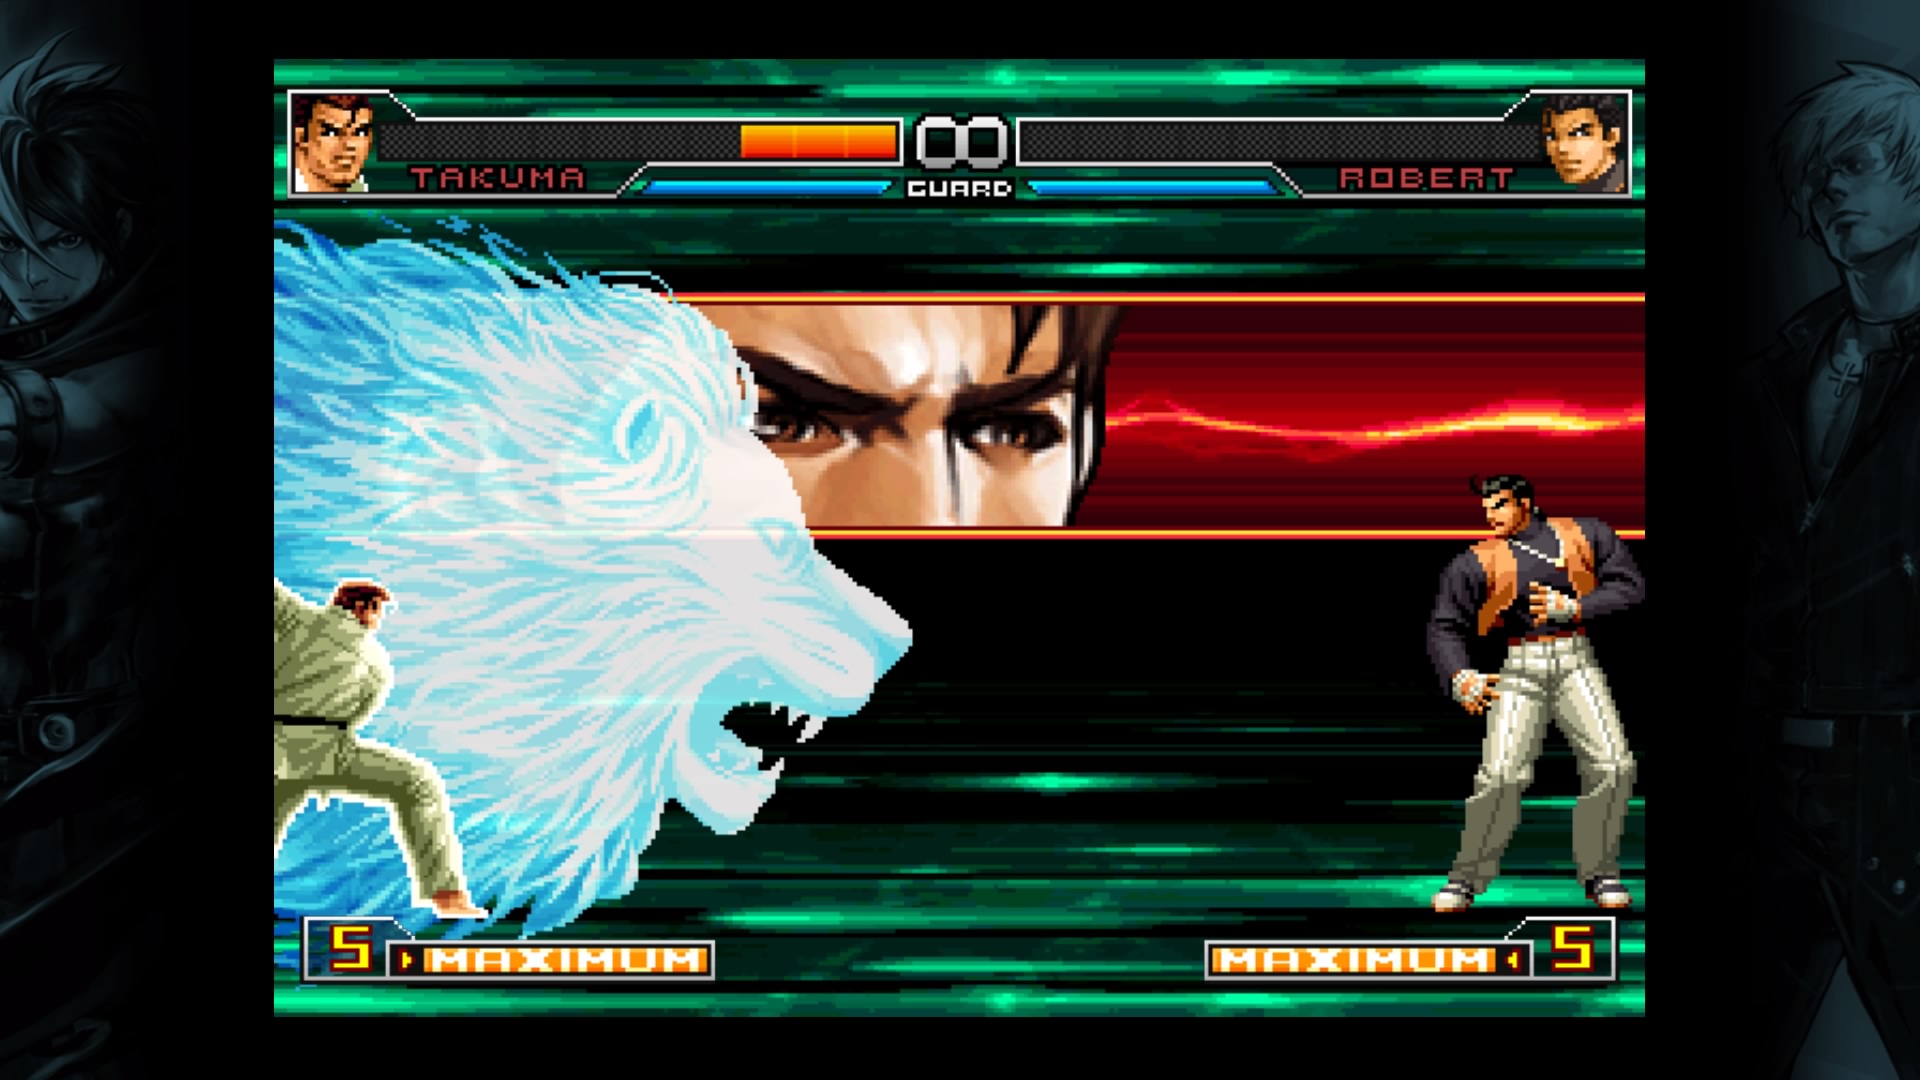 Review: King of Fighters 2002 Ultimate Match Delivers Knockout Action